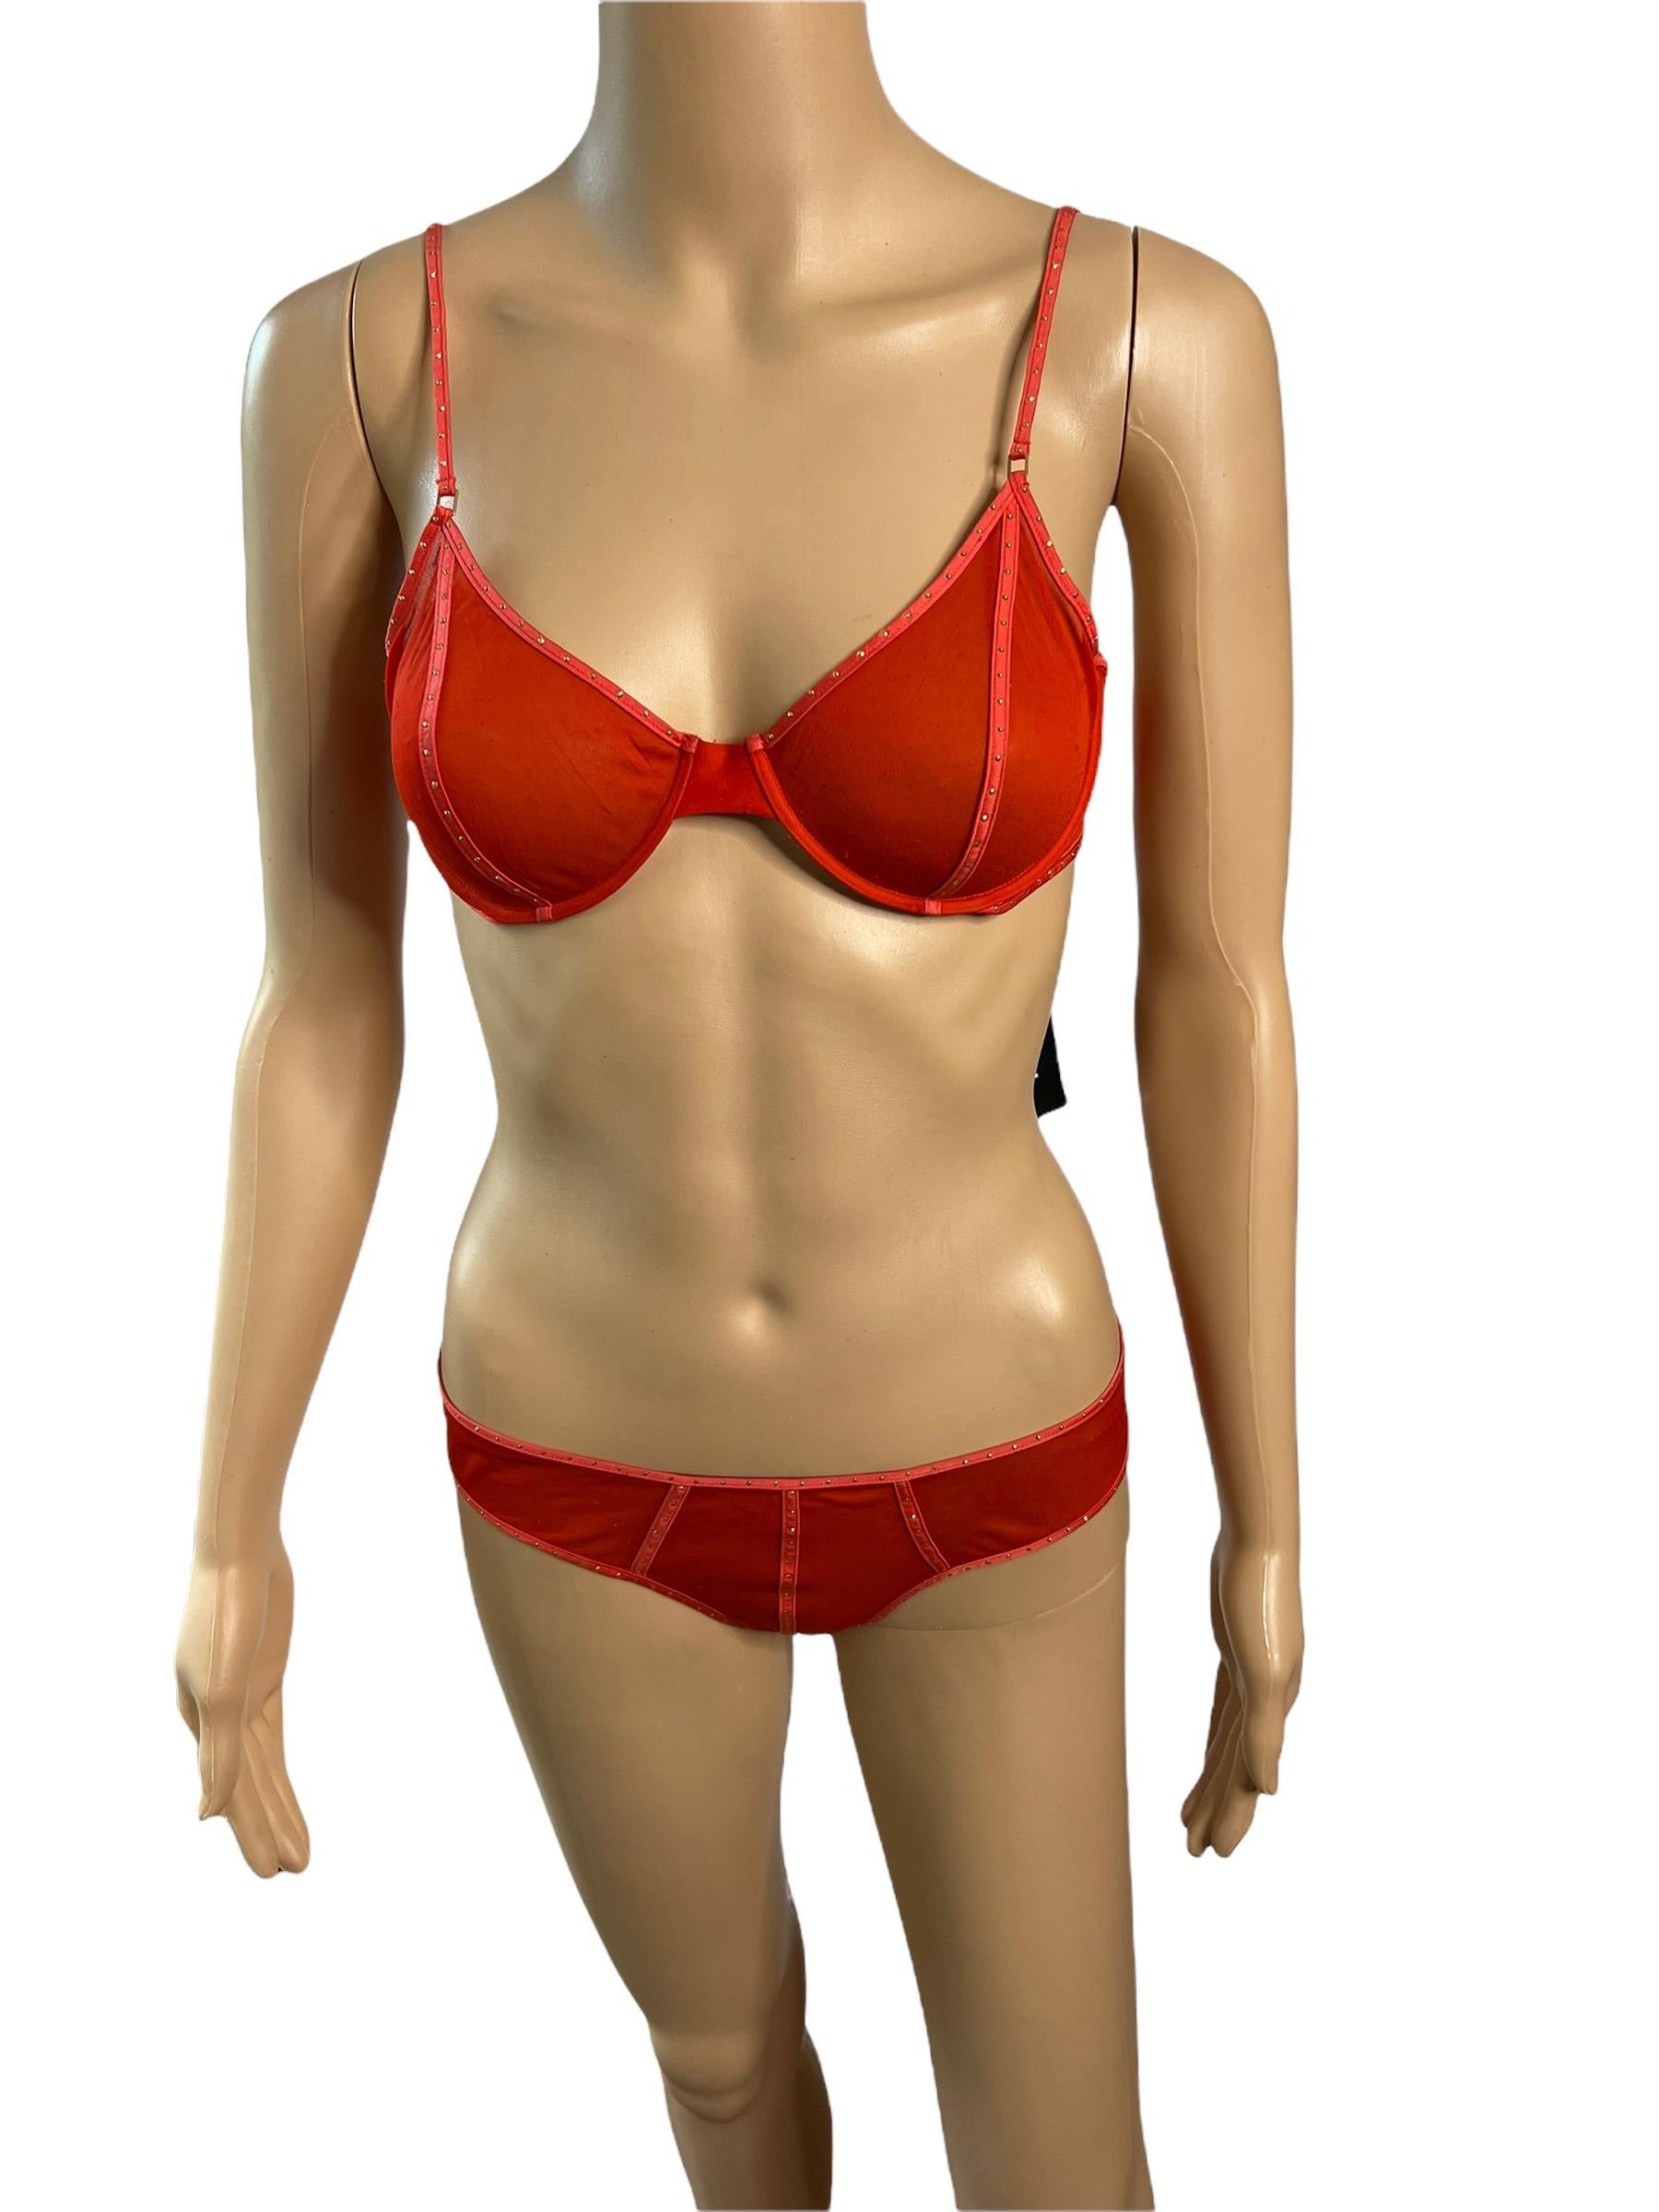 Tom Ford for Gucci F/W 2003 Bondage Studded Sheer Red Bra & Panty Lingerie 2 Piece Set Size M

Please note this set hasn't been worn, however due to storage and time it has pulling throughout and a few pin sized holes as seen in the last three